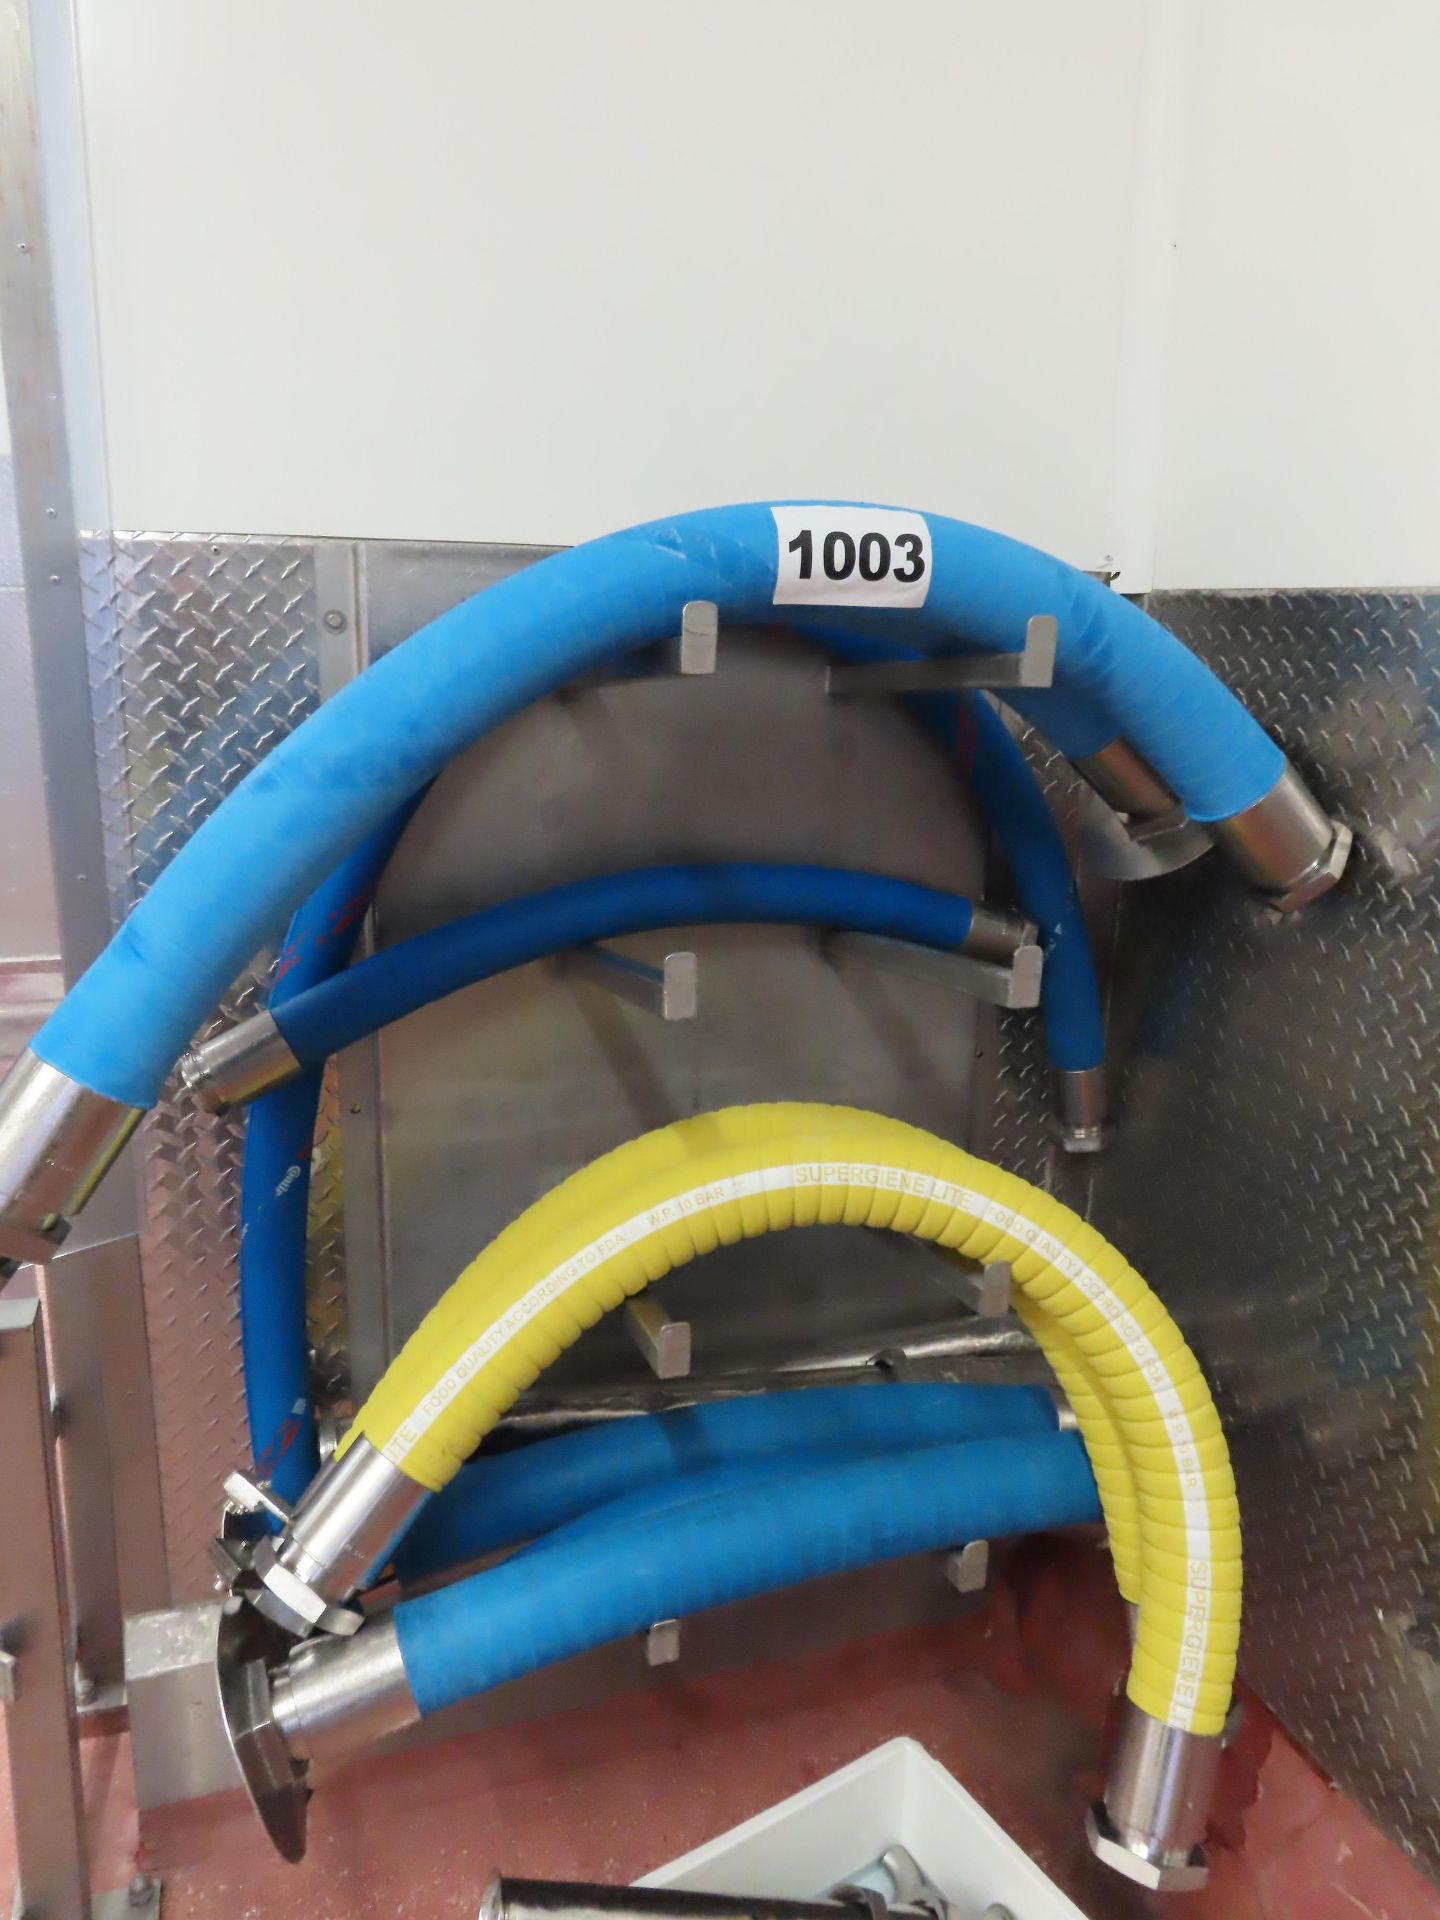 WALL MOUNTED HOSE HOLDER AND HOSES.